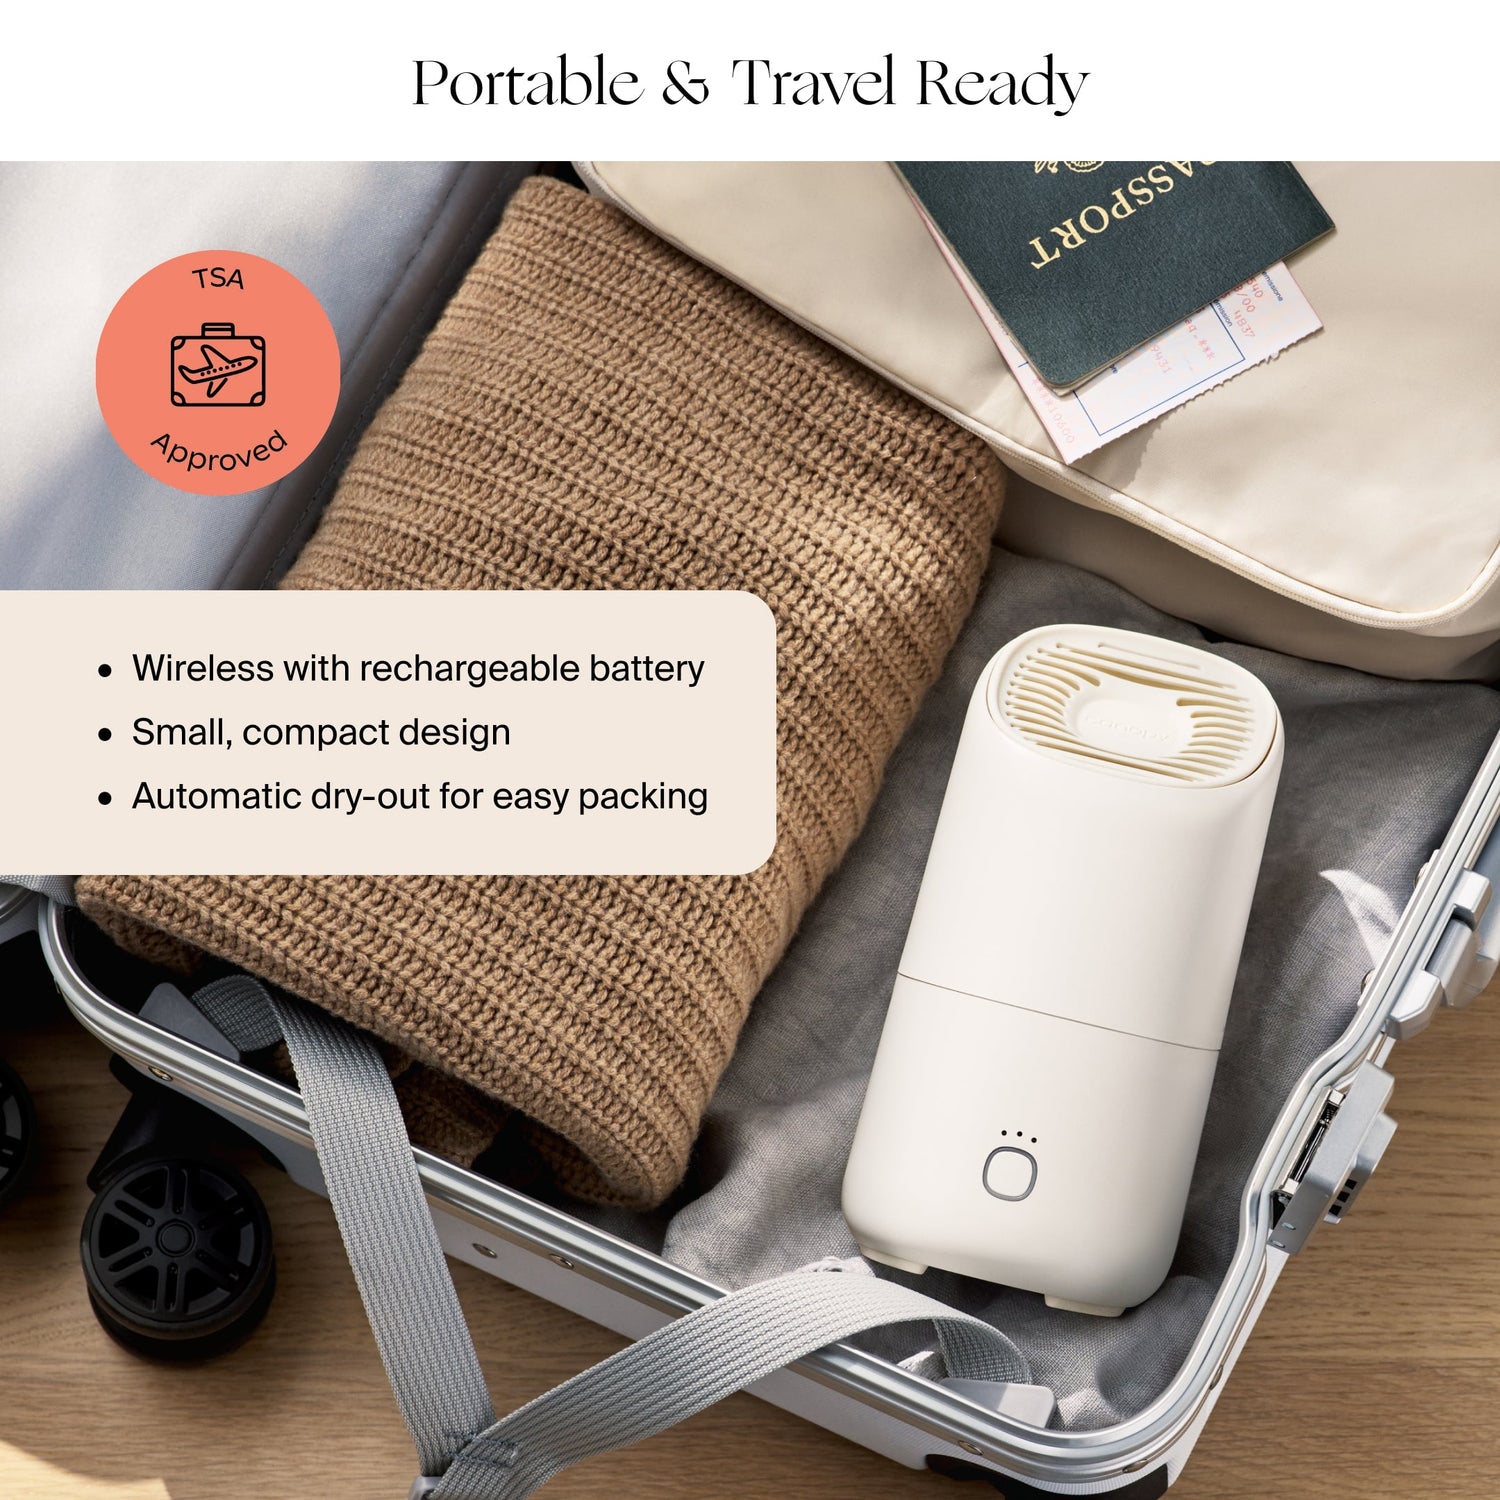 Portable Humidifier Duo | Lifestyle, Portable & Travel Ready